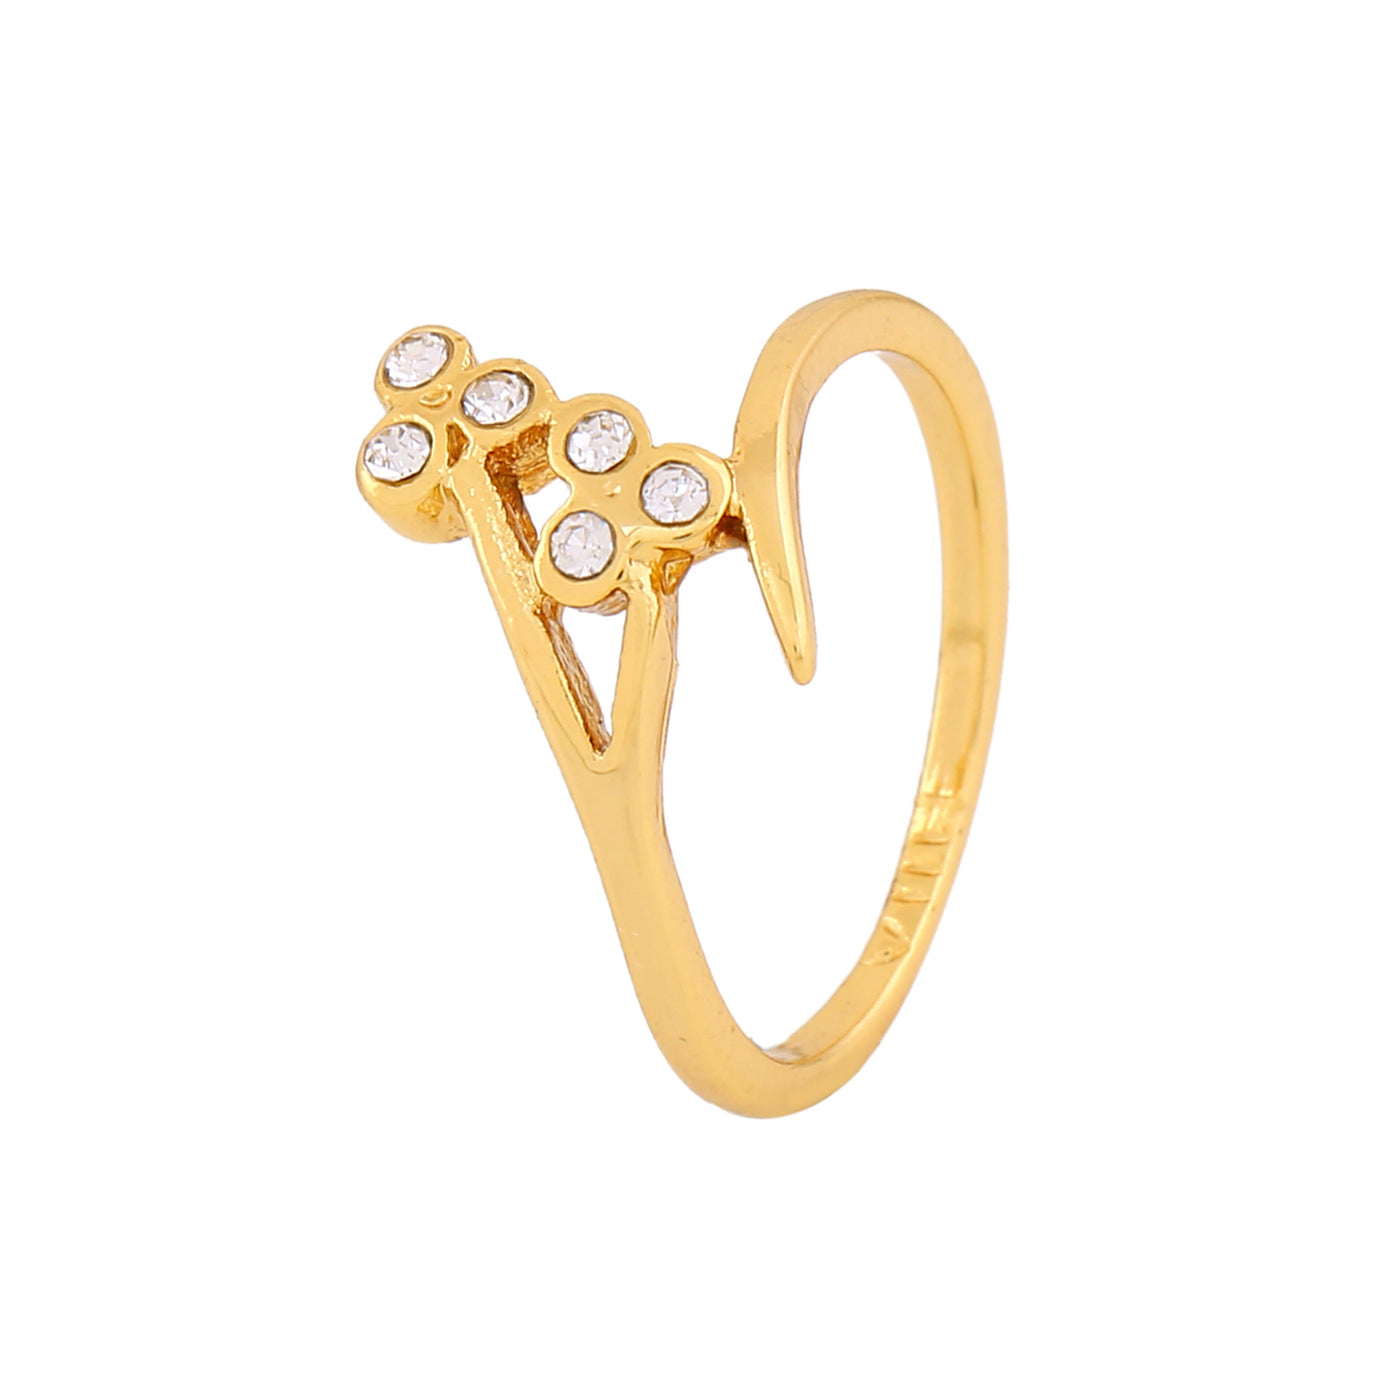 Estele Gold Plated Twin Flower Designer Finger Ring with Crystals for Women